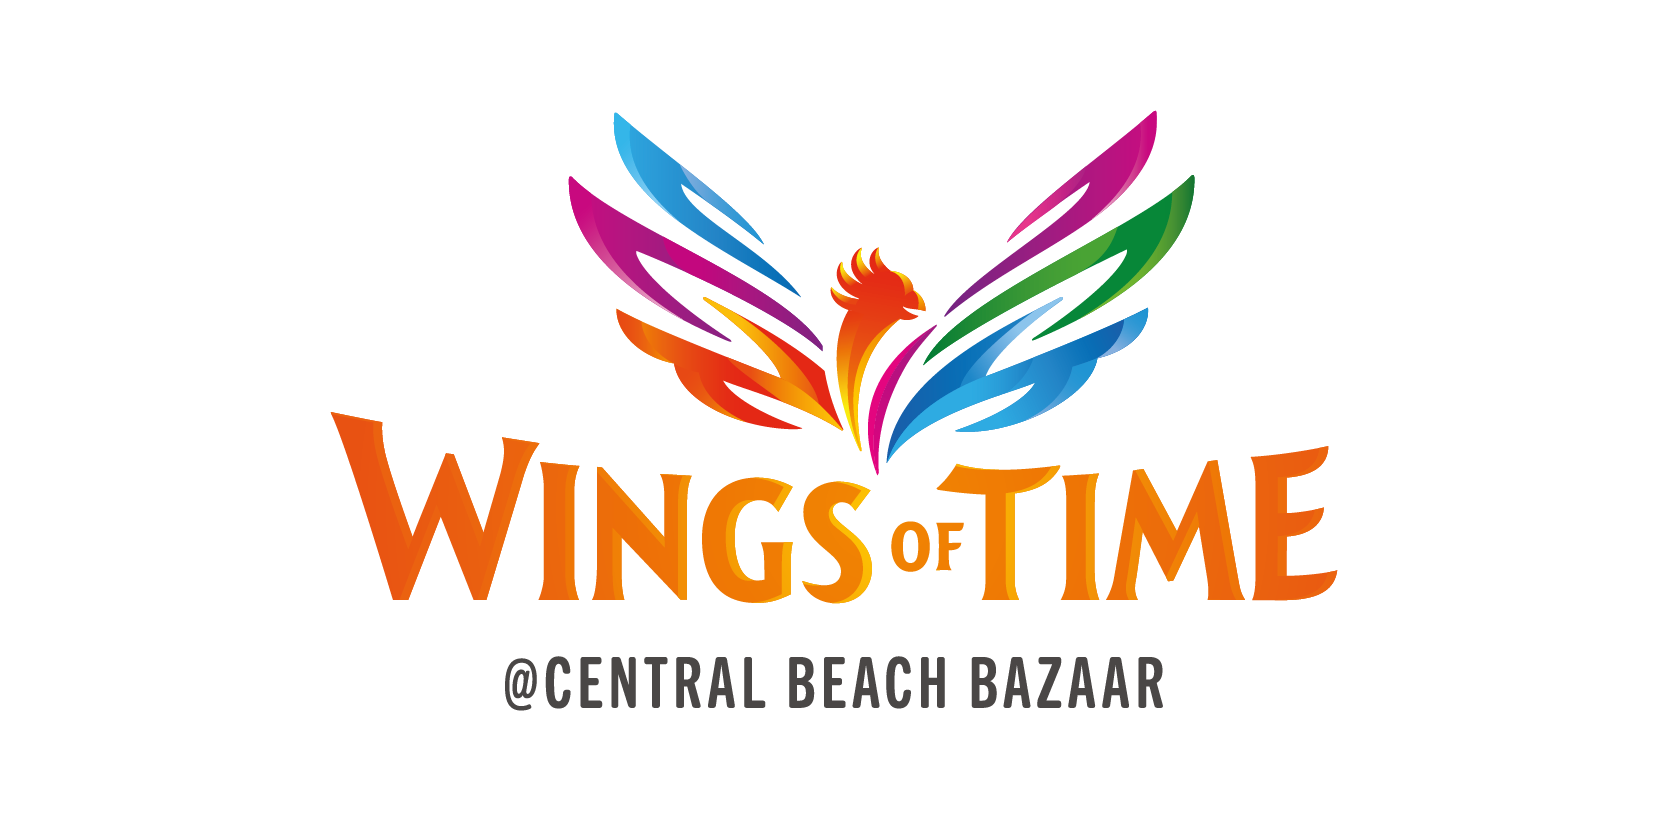 Wings of time logo